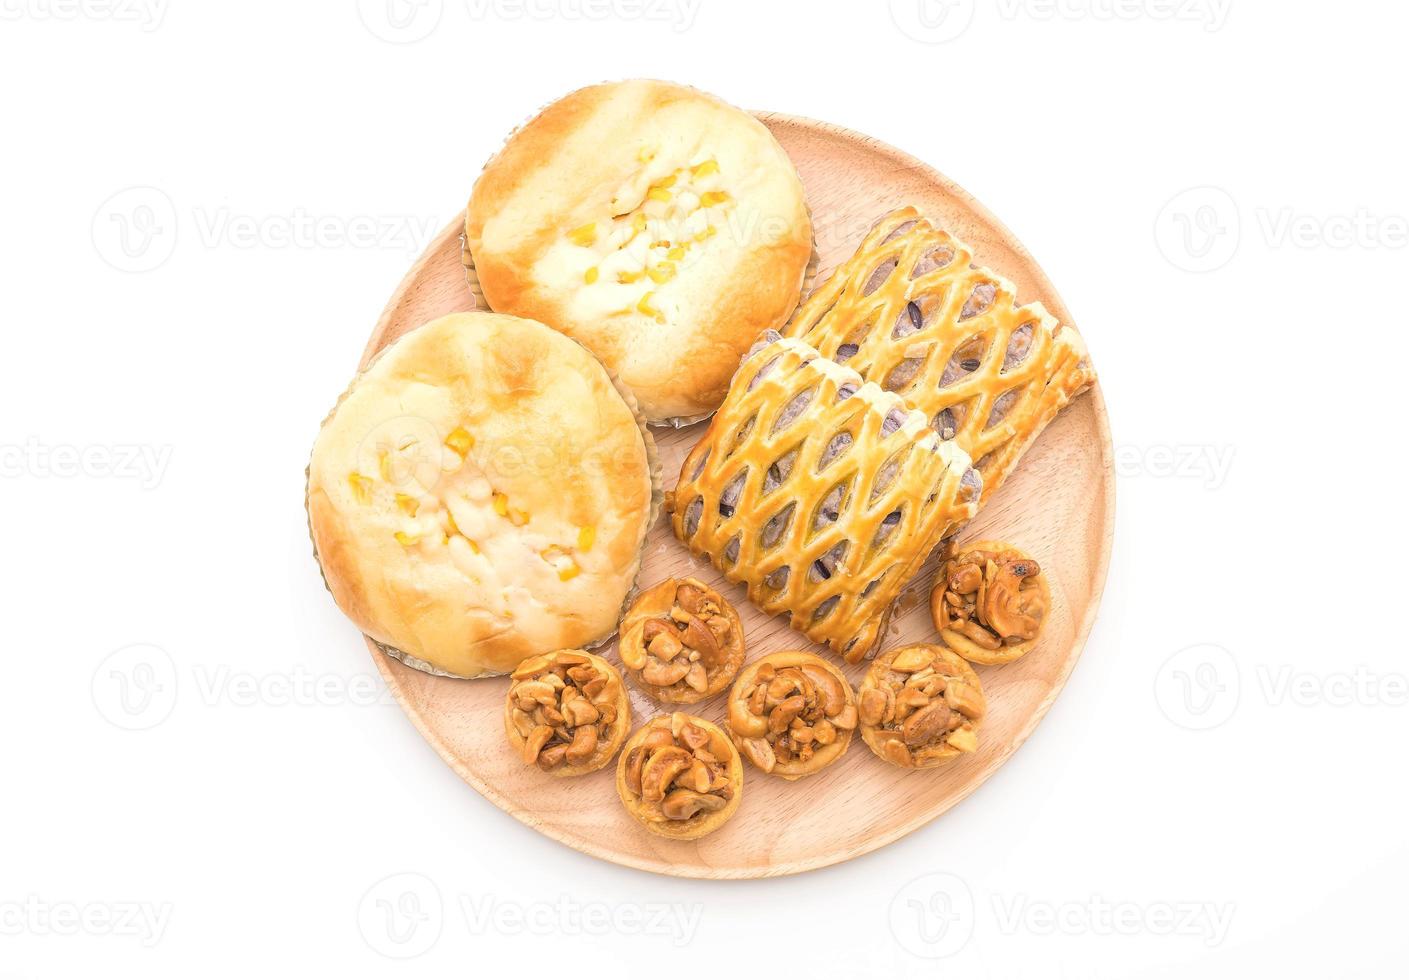 Toffee cake, bread with corn mayonaise, and taro pies on white background photo